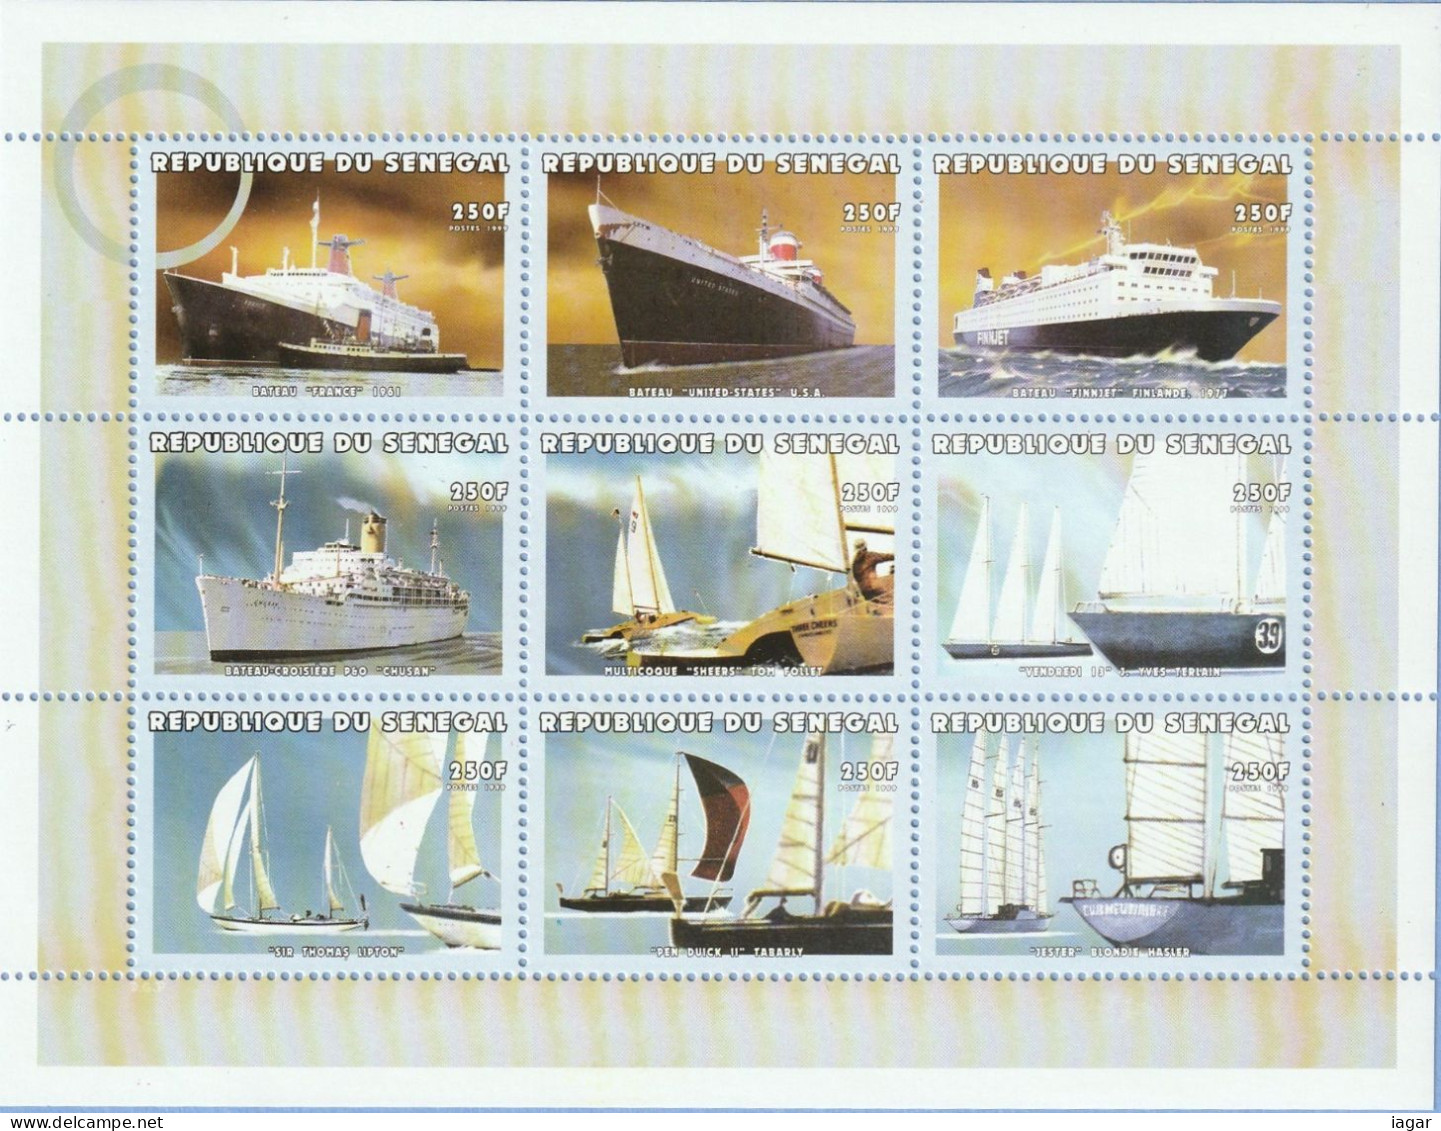 THEMATIC TRANSPORT: HISTORIC SHIPS AND FAMOUS SAILING SHIPS. LE"FRANCE", "UNITED STATES", "PEN DUICK II"  Etc  - SENEGAL - Autres (Mer)